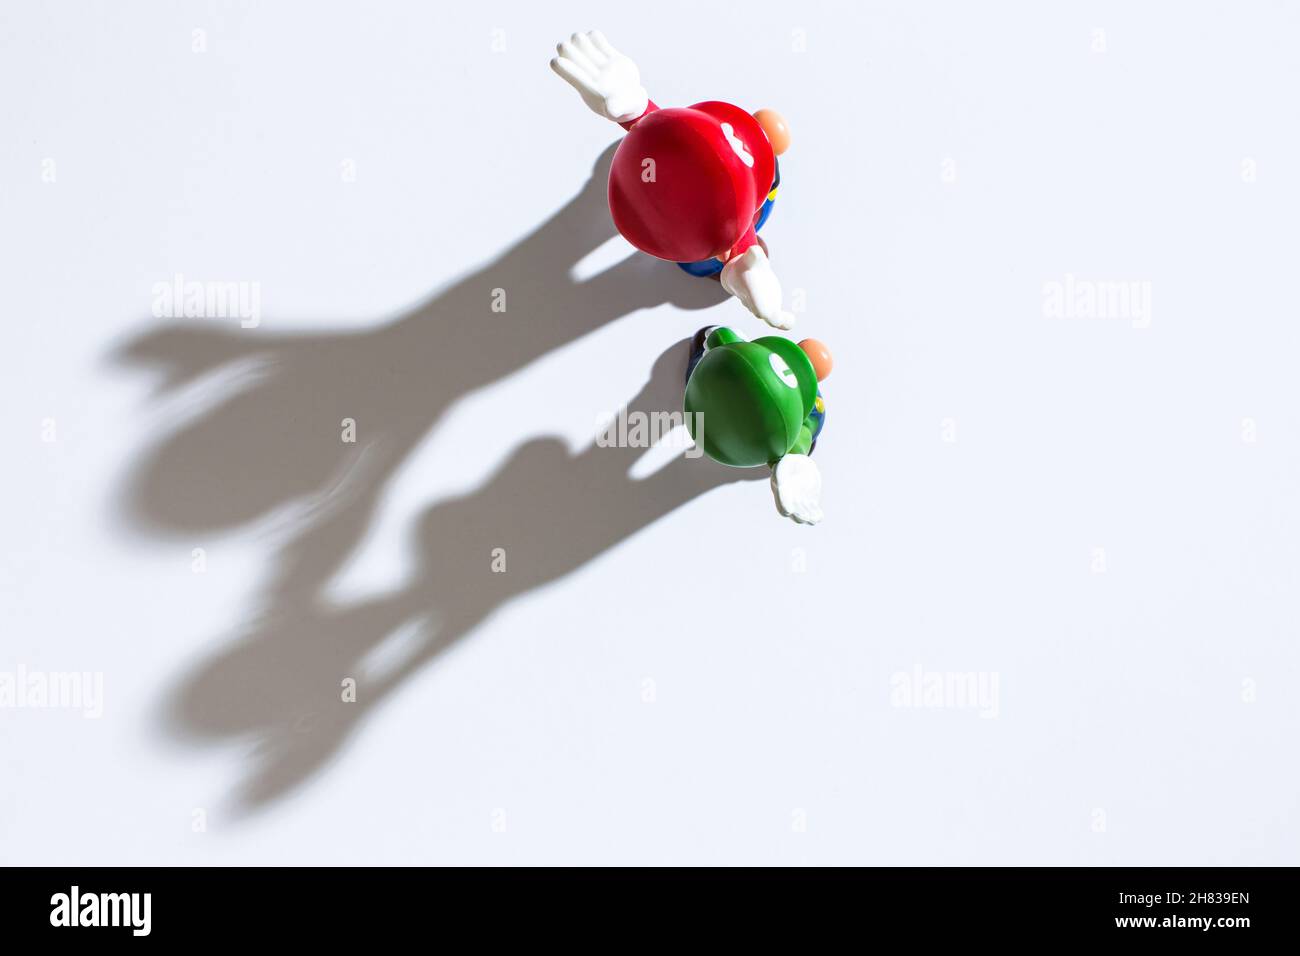 Moscow, Russia - November 27, 2021: Top view of plastic figure of Mario and Luigi from Nintendo video game. Stock Photo